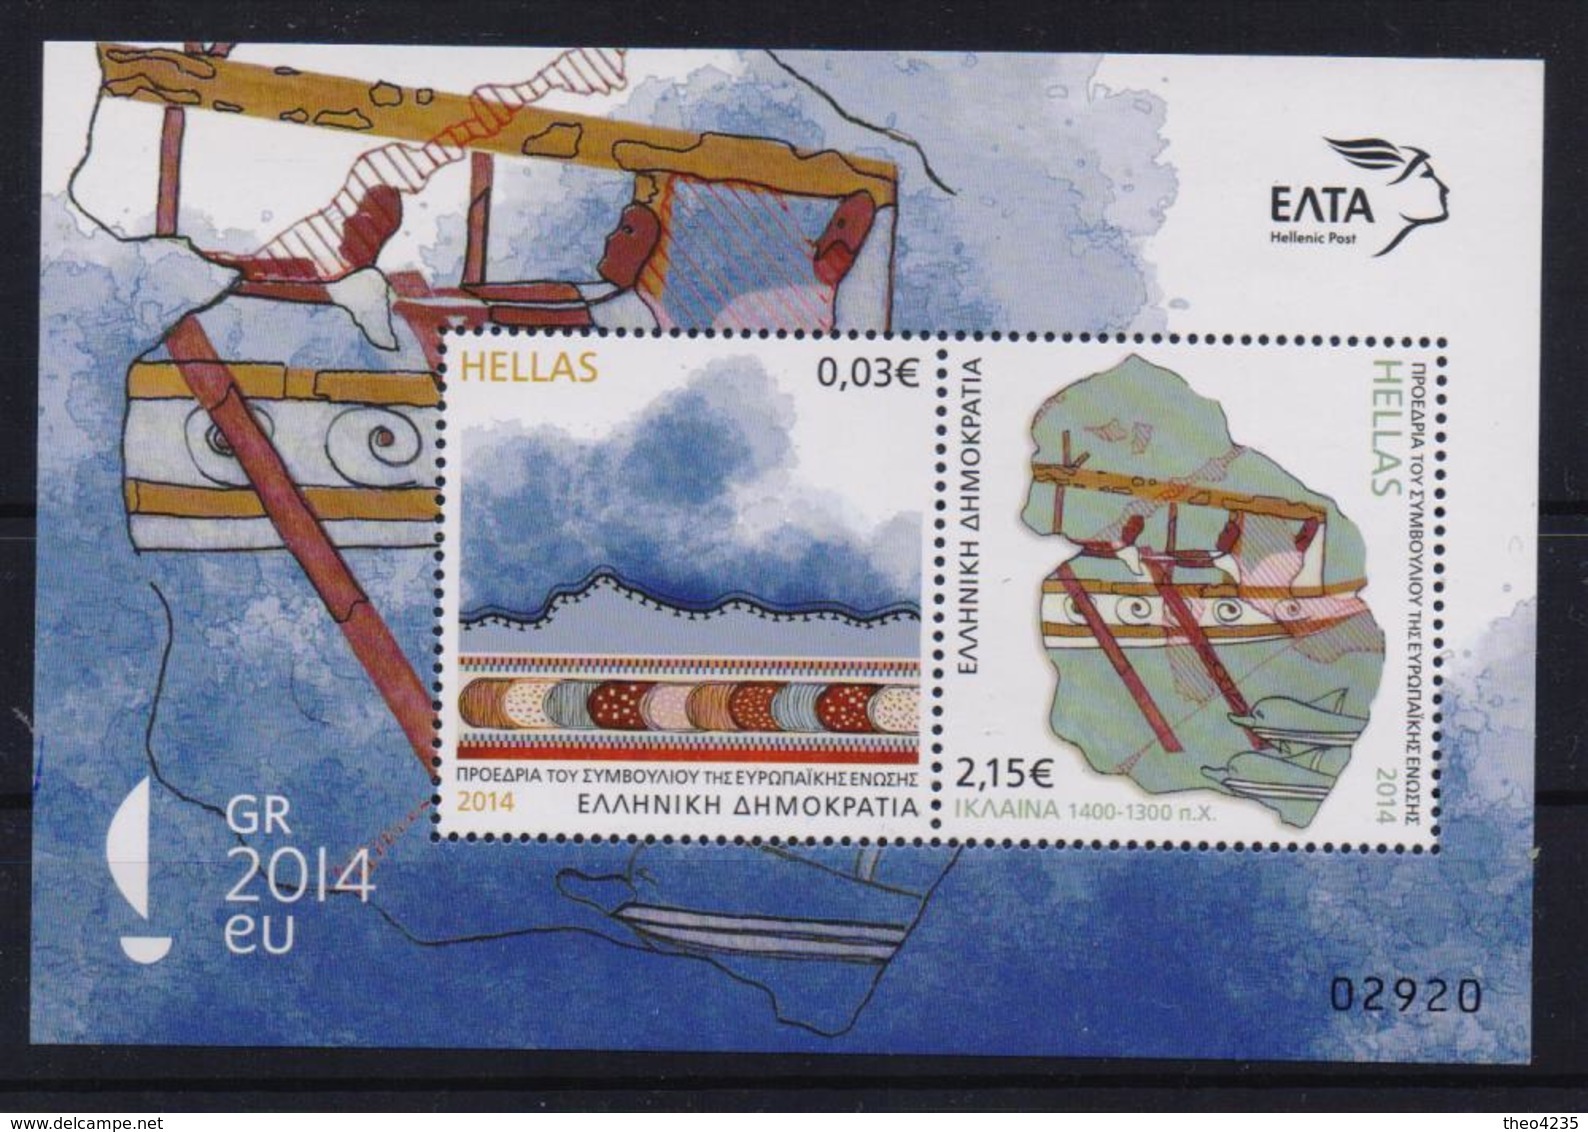 GREECE STAMPS 2014/ GREEK PRESIDENCY OF THE COUNCIL OF E.U M/S-15/1/14-PART OF THE SET - Nuovi